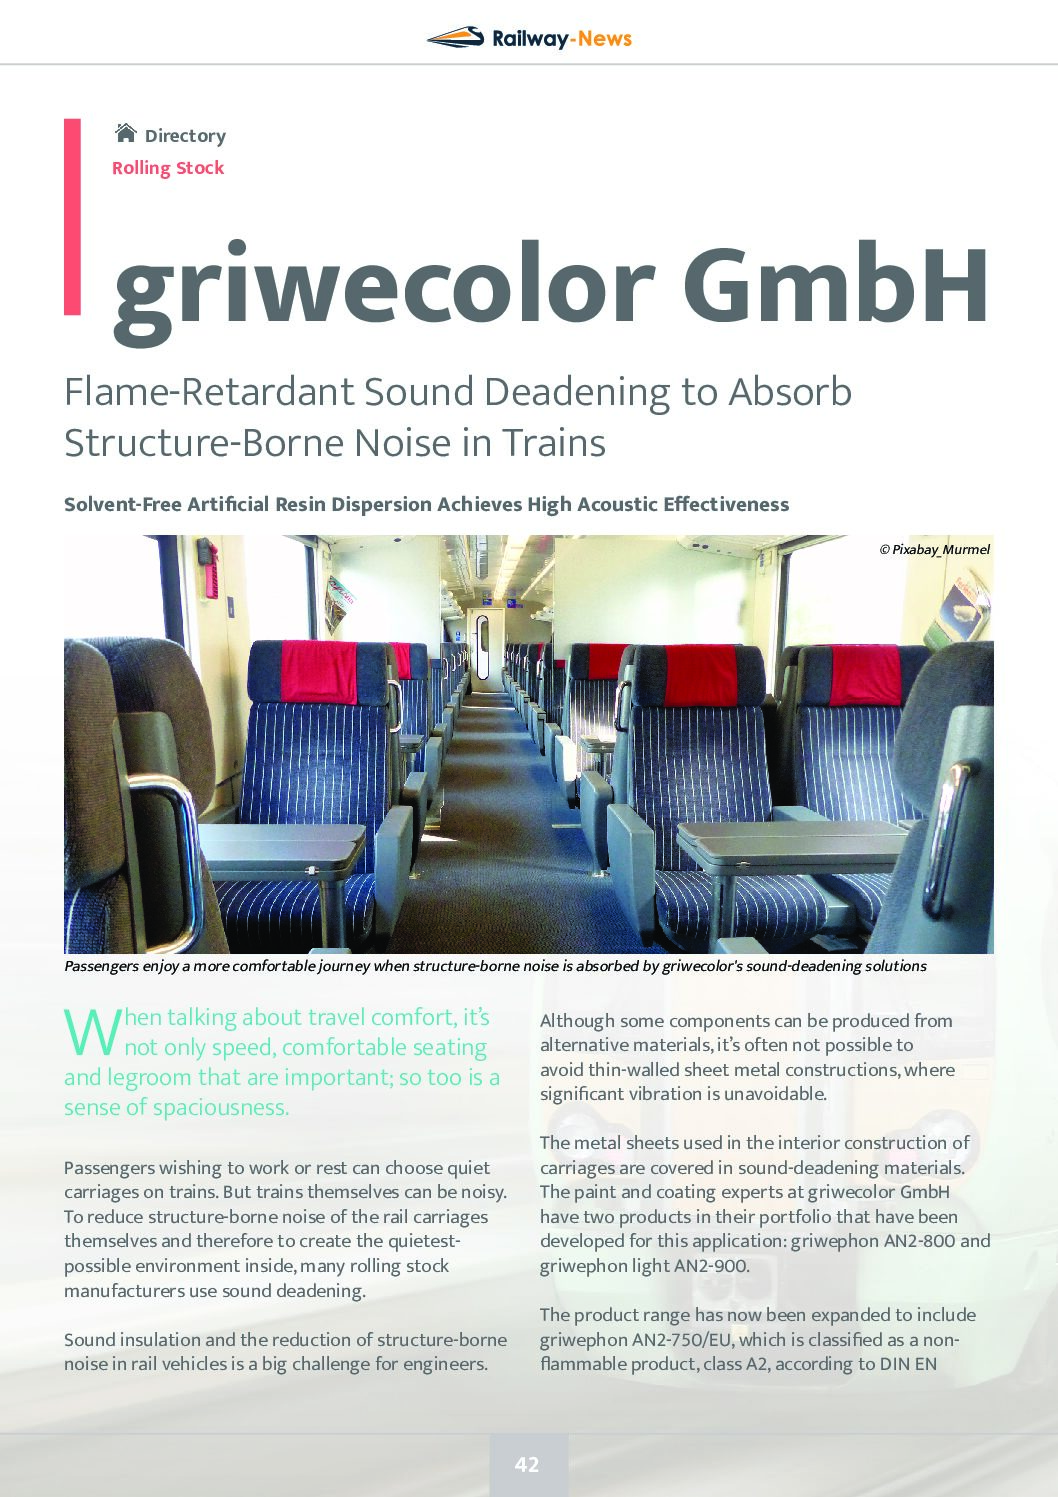 Flame-Retardant Sound Deadening to Absorb Structure-Borne Noise in Trains